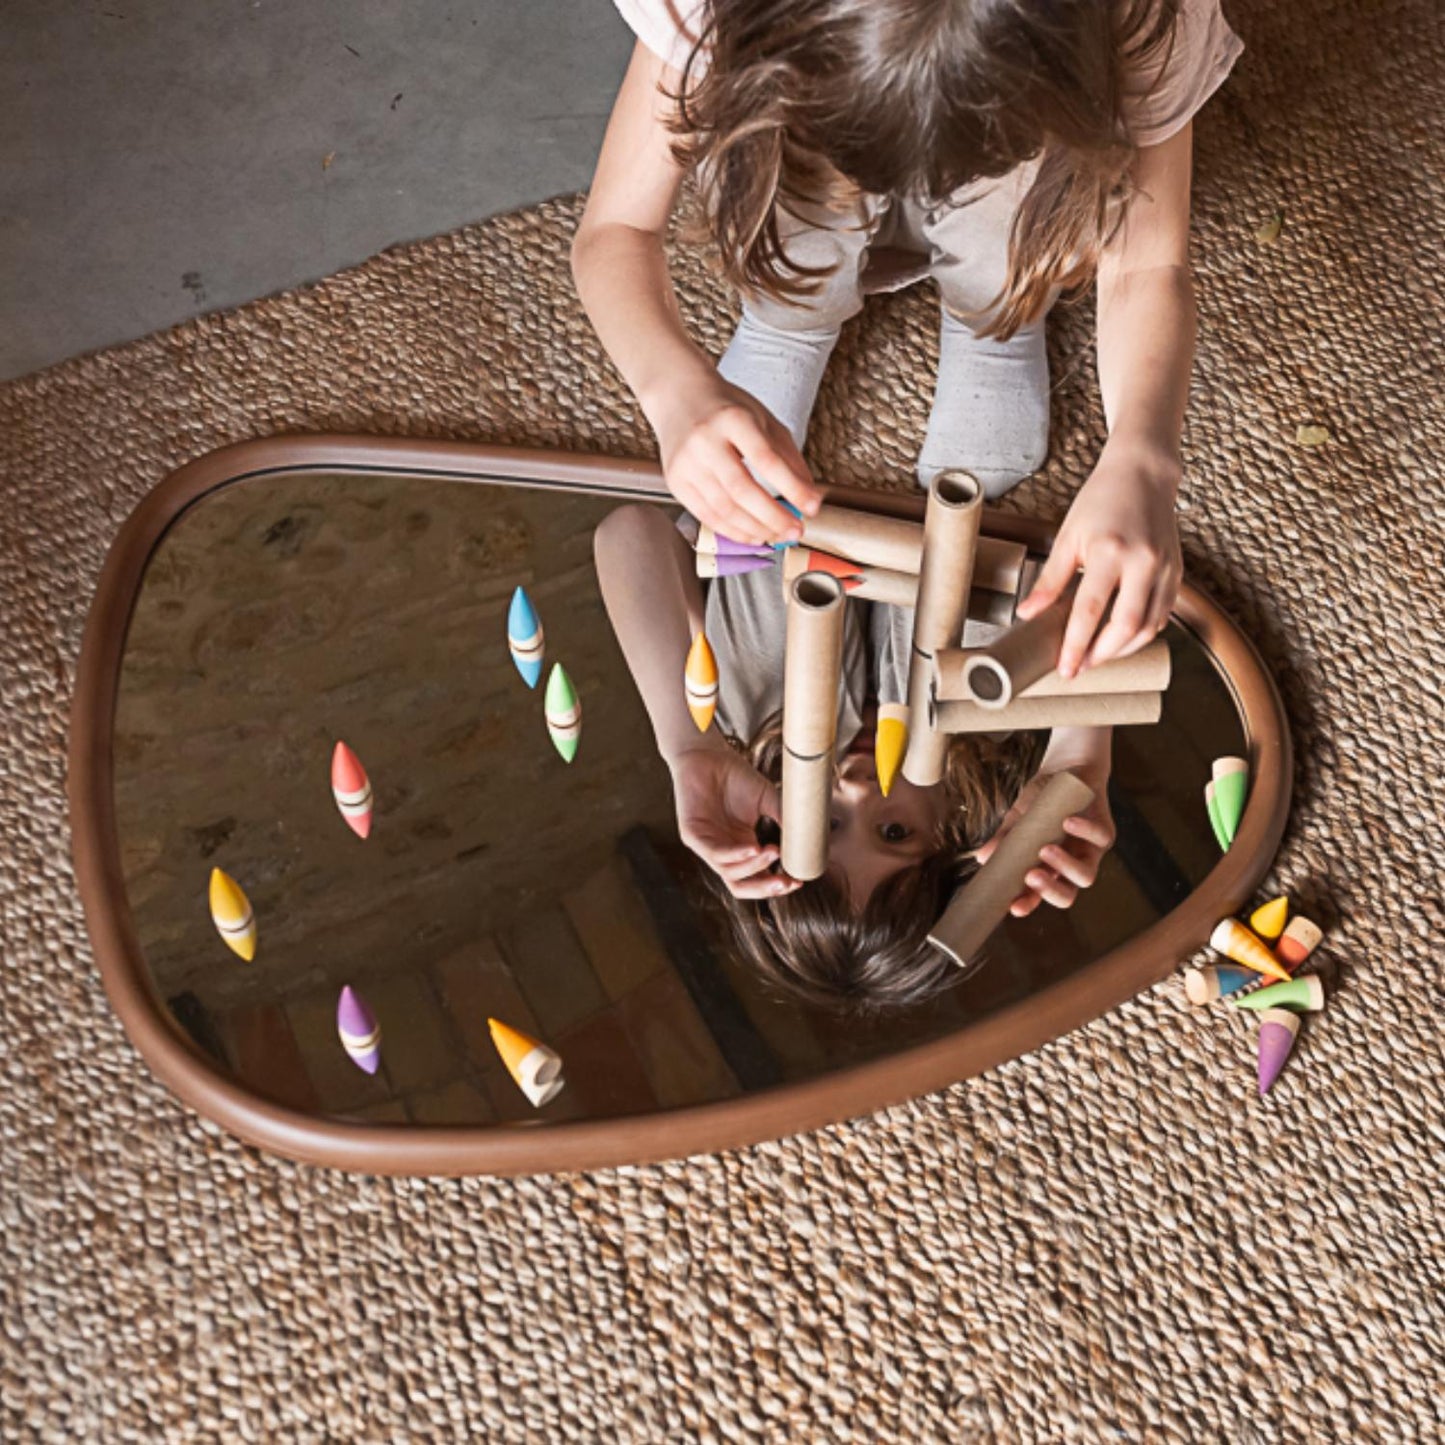 Grapat Baby Sticks | Wooden Toys for Kids | Open-Ended Play Set | Lifestyle: Girl Playing Grapat Baby Sticks and Tubes | BeoVERDE.ie